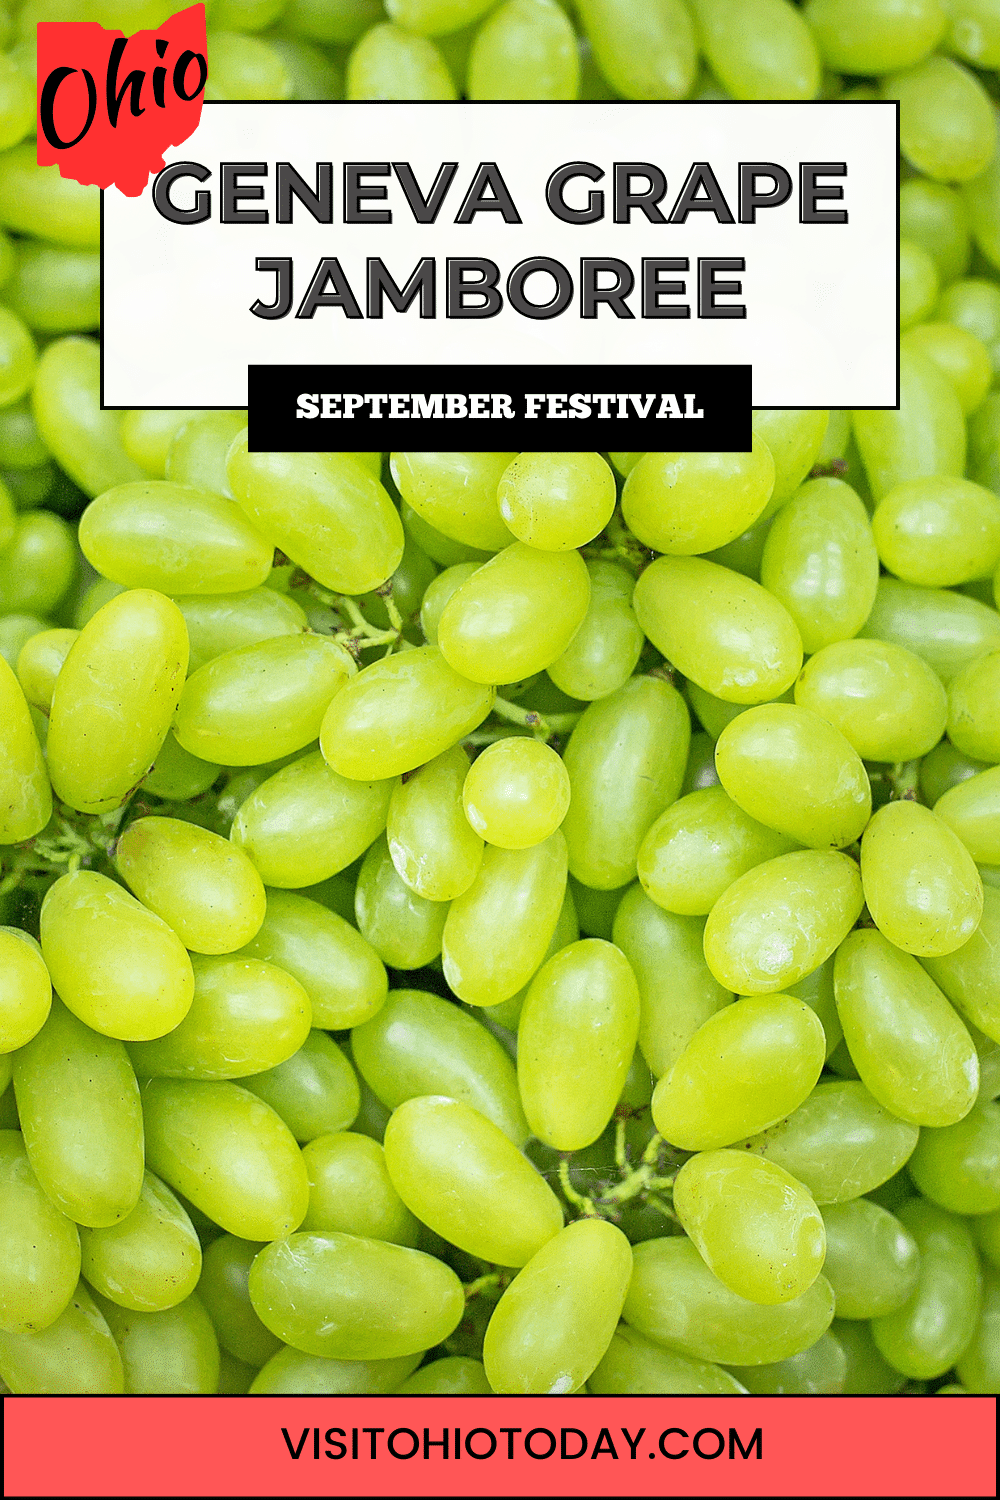 The Geneva Grape Jamboree takes place over two days, September 23 and 24, 2023. This festival is a celebration of the grape harvest in the Geneva area. Visitors can taste grapes, grape juice, grape pies, wine, and various other products.